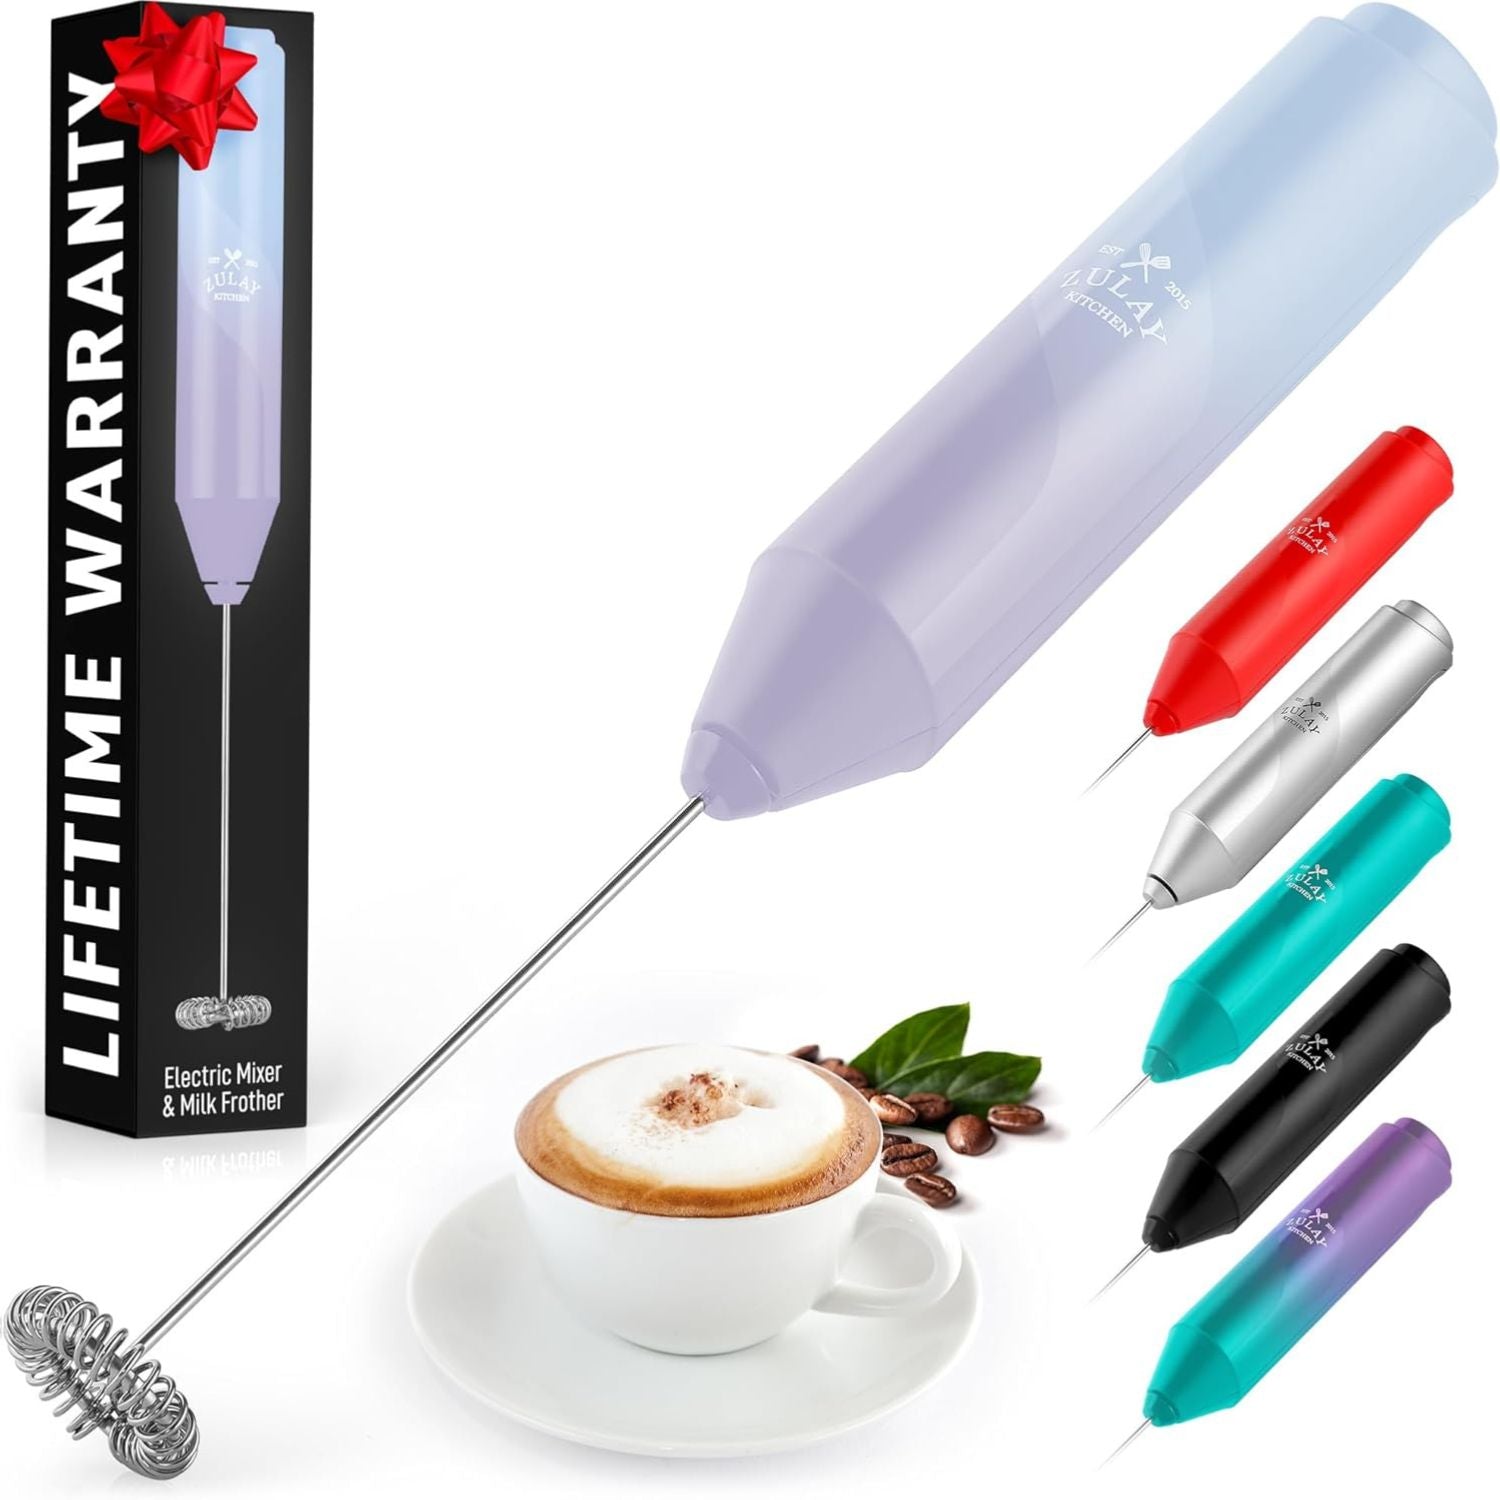 FrothMate Milk Frother Without Stand - Powerful Handheld Frother for lattes, cappuccinos, matcha, hot chocolate